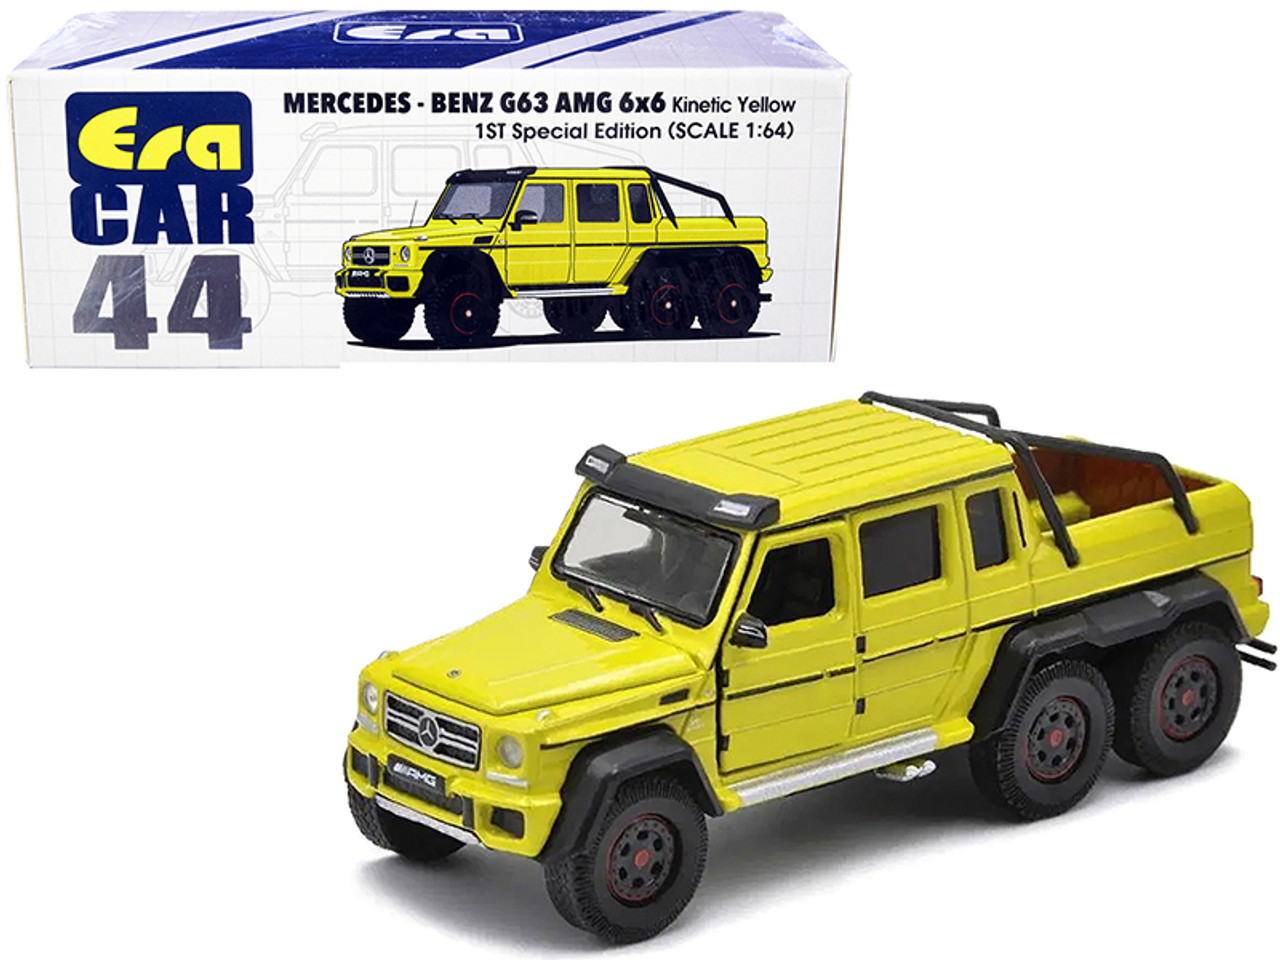 Mercedes Benz G63 AMG 6x6 Pickup Truck Kinetic Yellow "1st Special Edition" 1/64 Diecast Model Car by Era Car